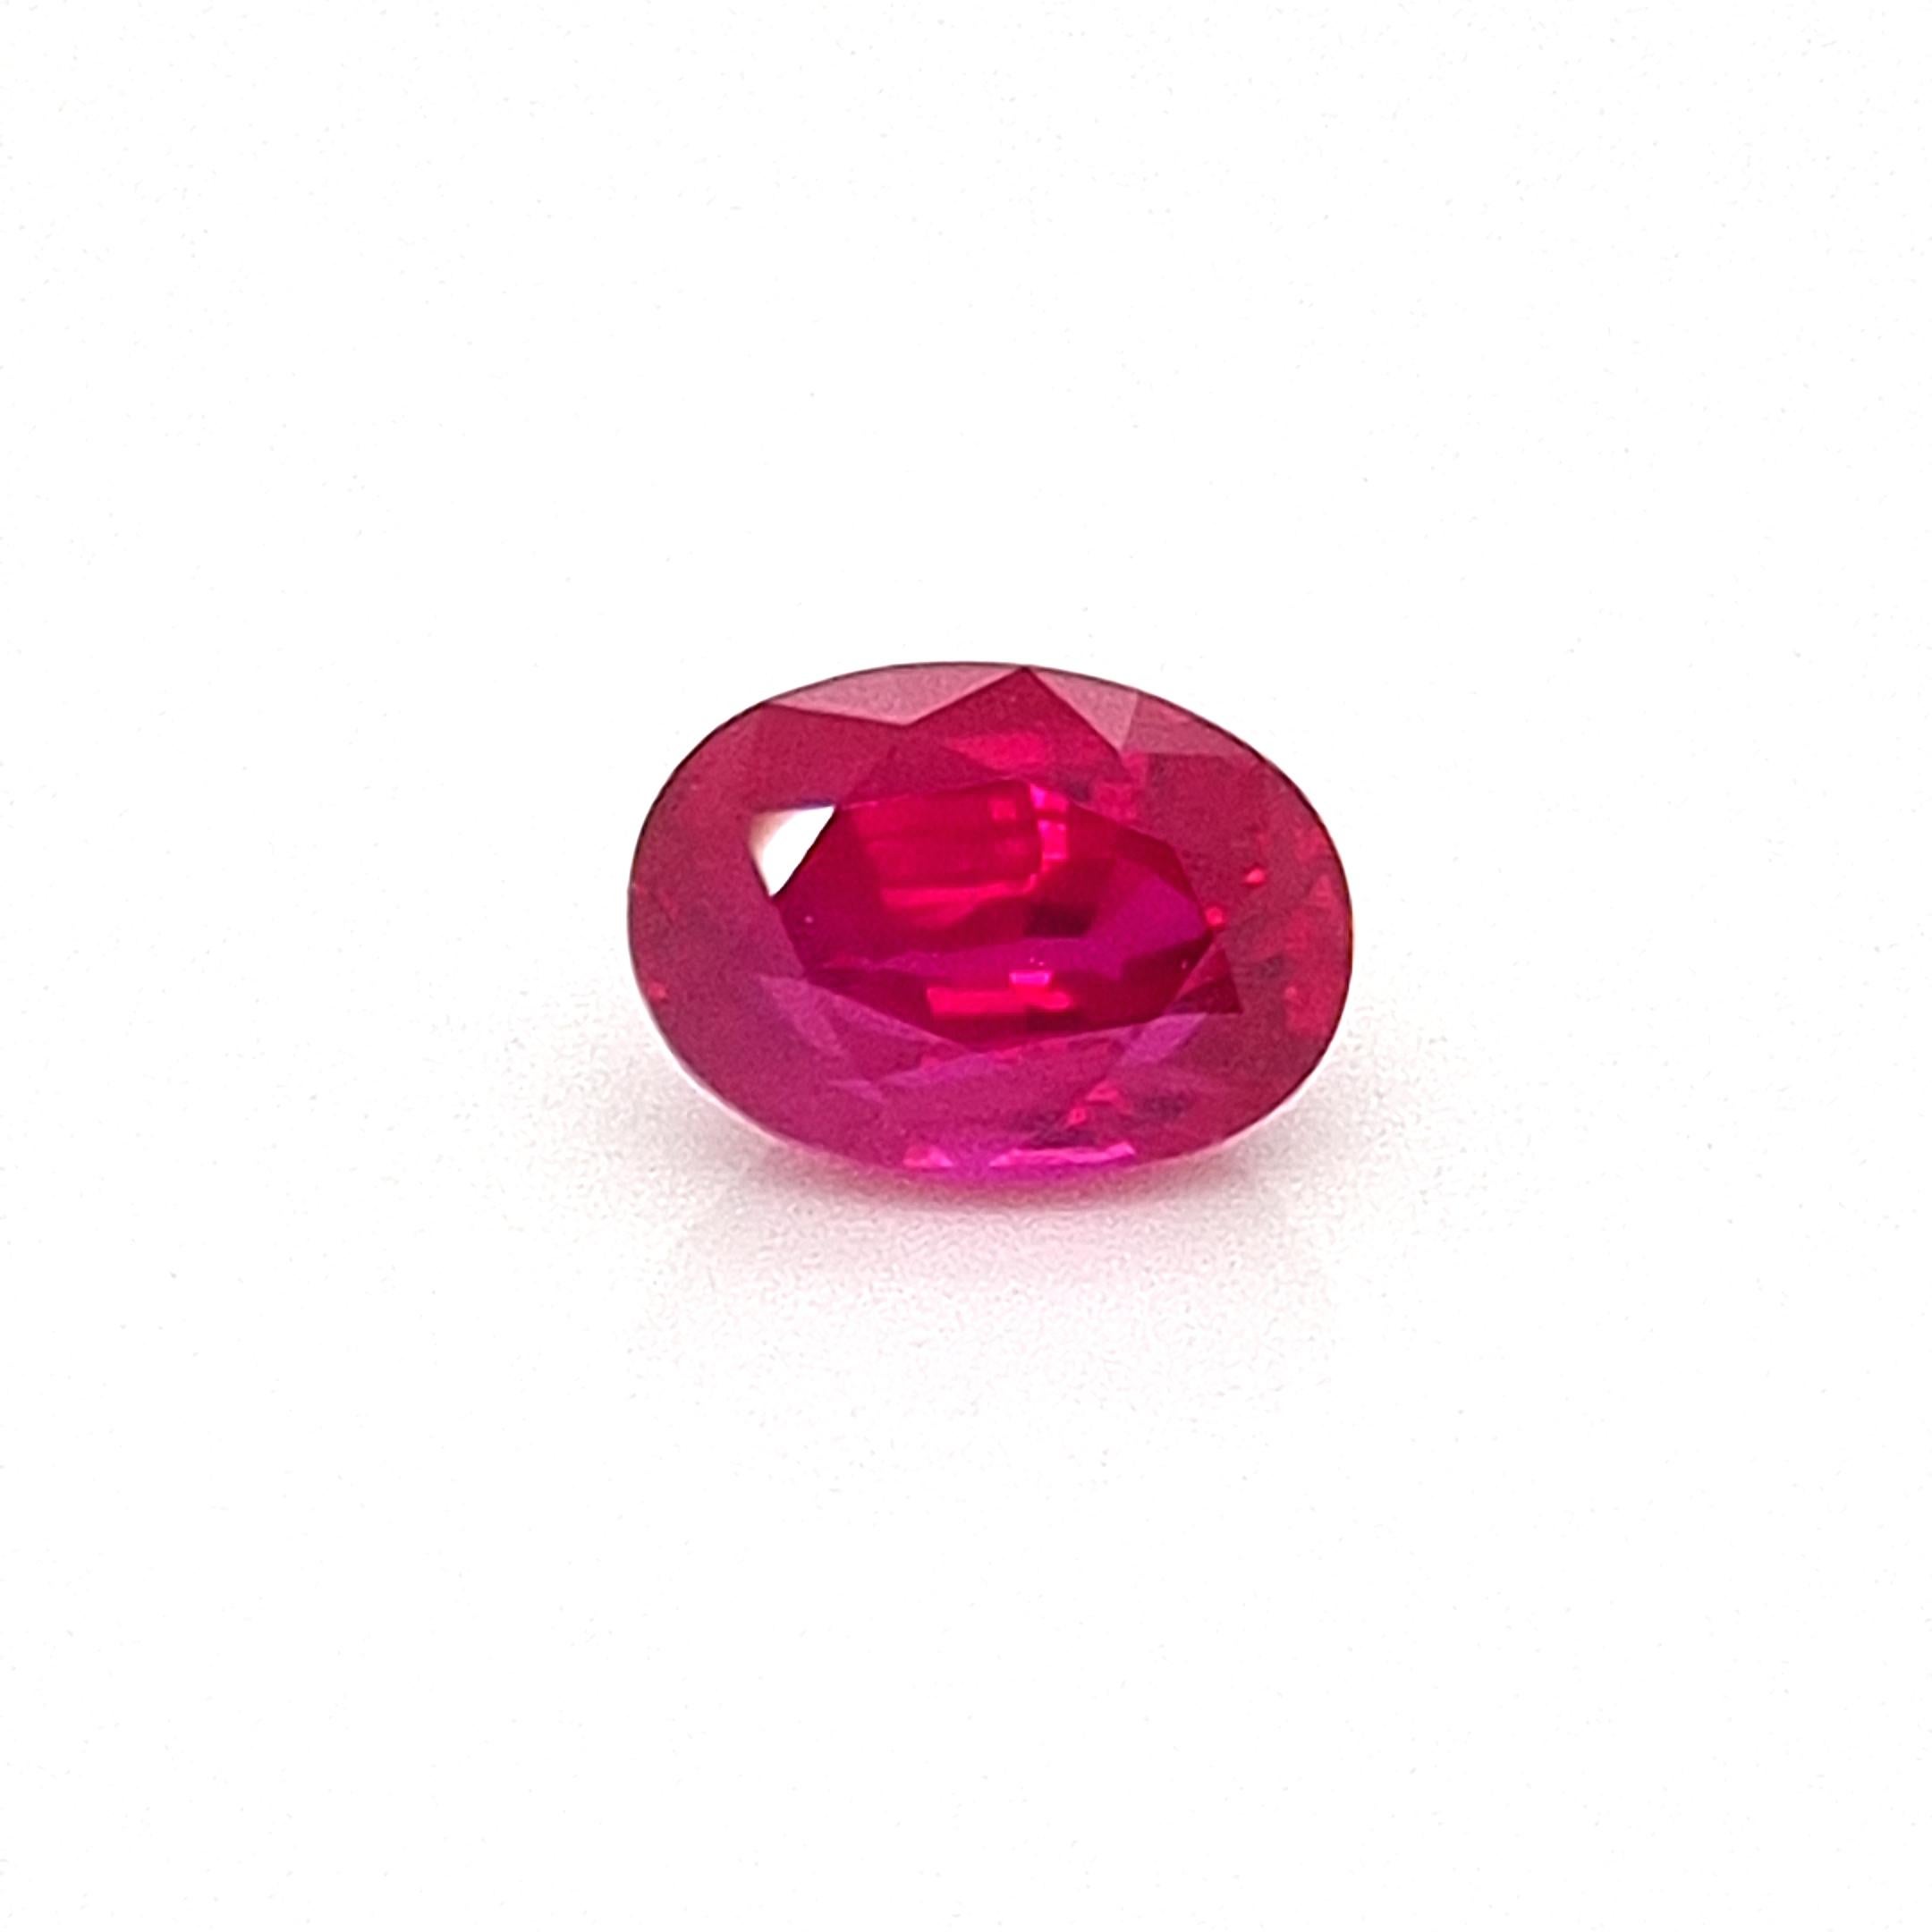 A 3 carat unheated Burmese 'Pigeons Blood' Red Ruby. 

This rare and very fine ruby is a superb gemstone befitting of any exceptional collection. 

The Ruby is an Oval shape, with a classic Pinkish Red color typical of Rubies that originate from the